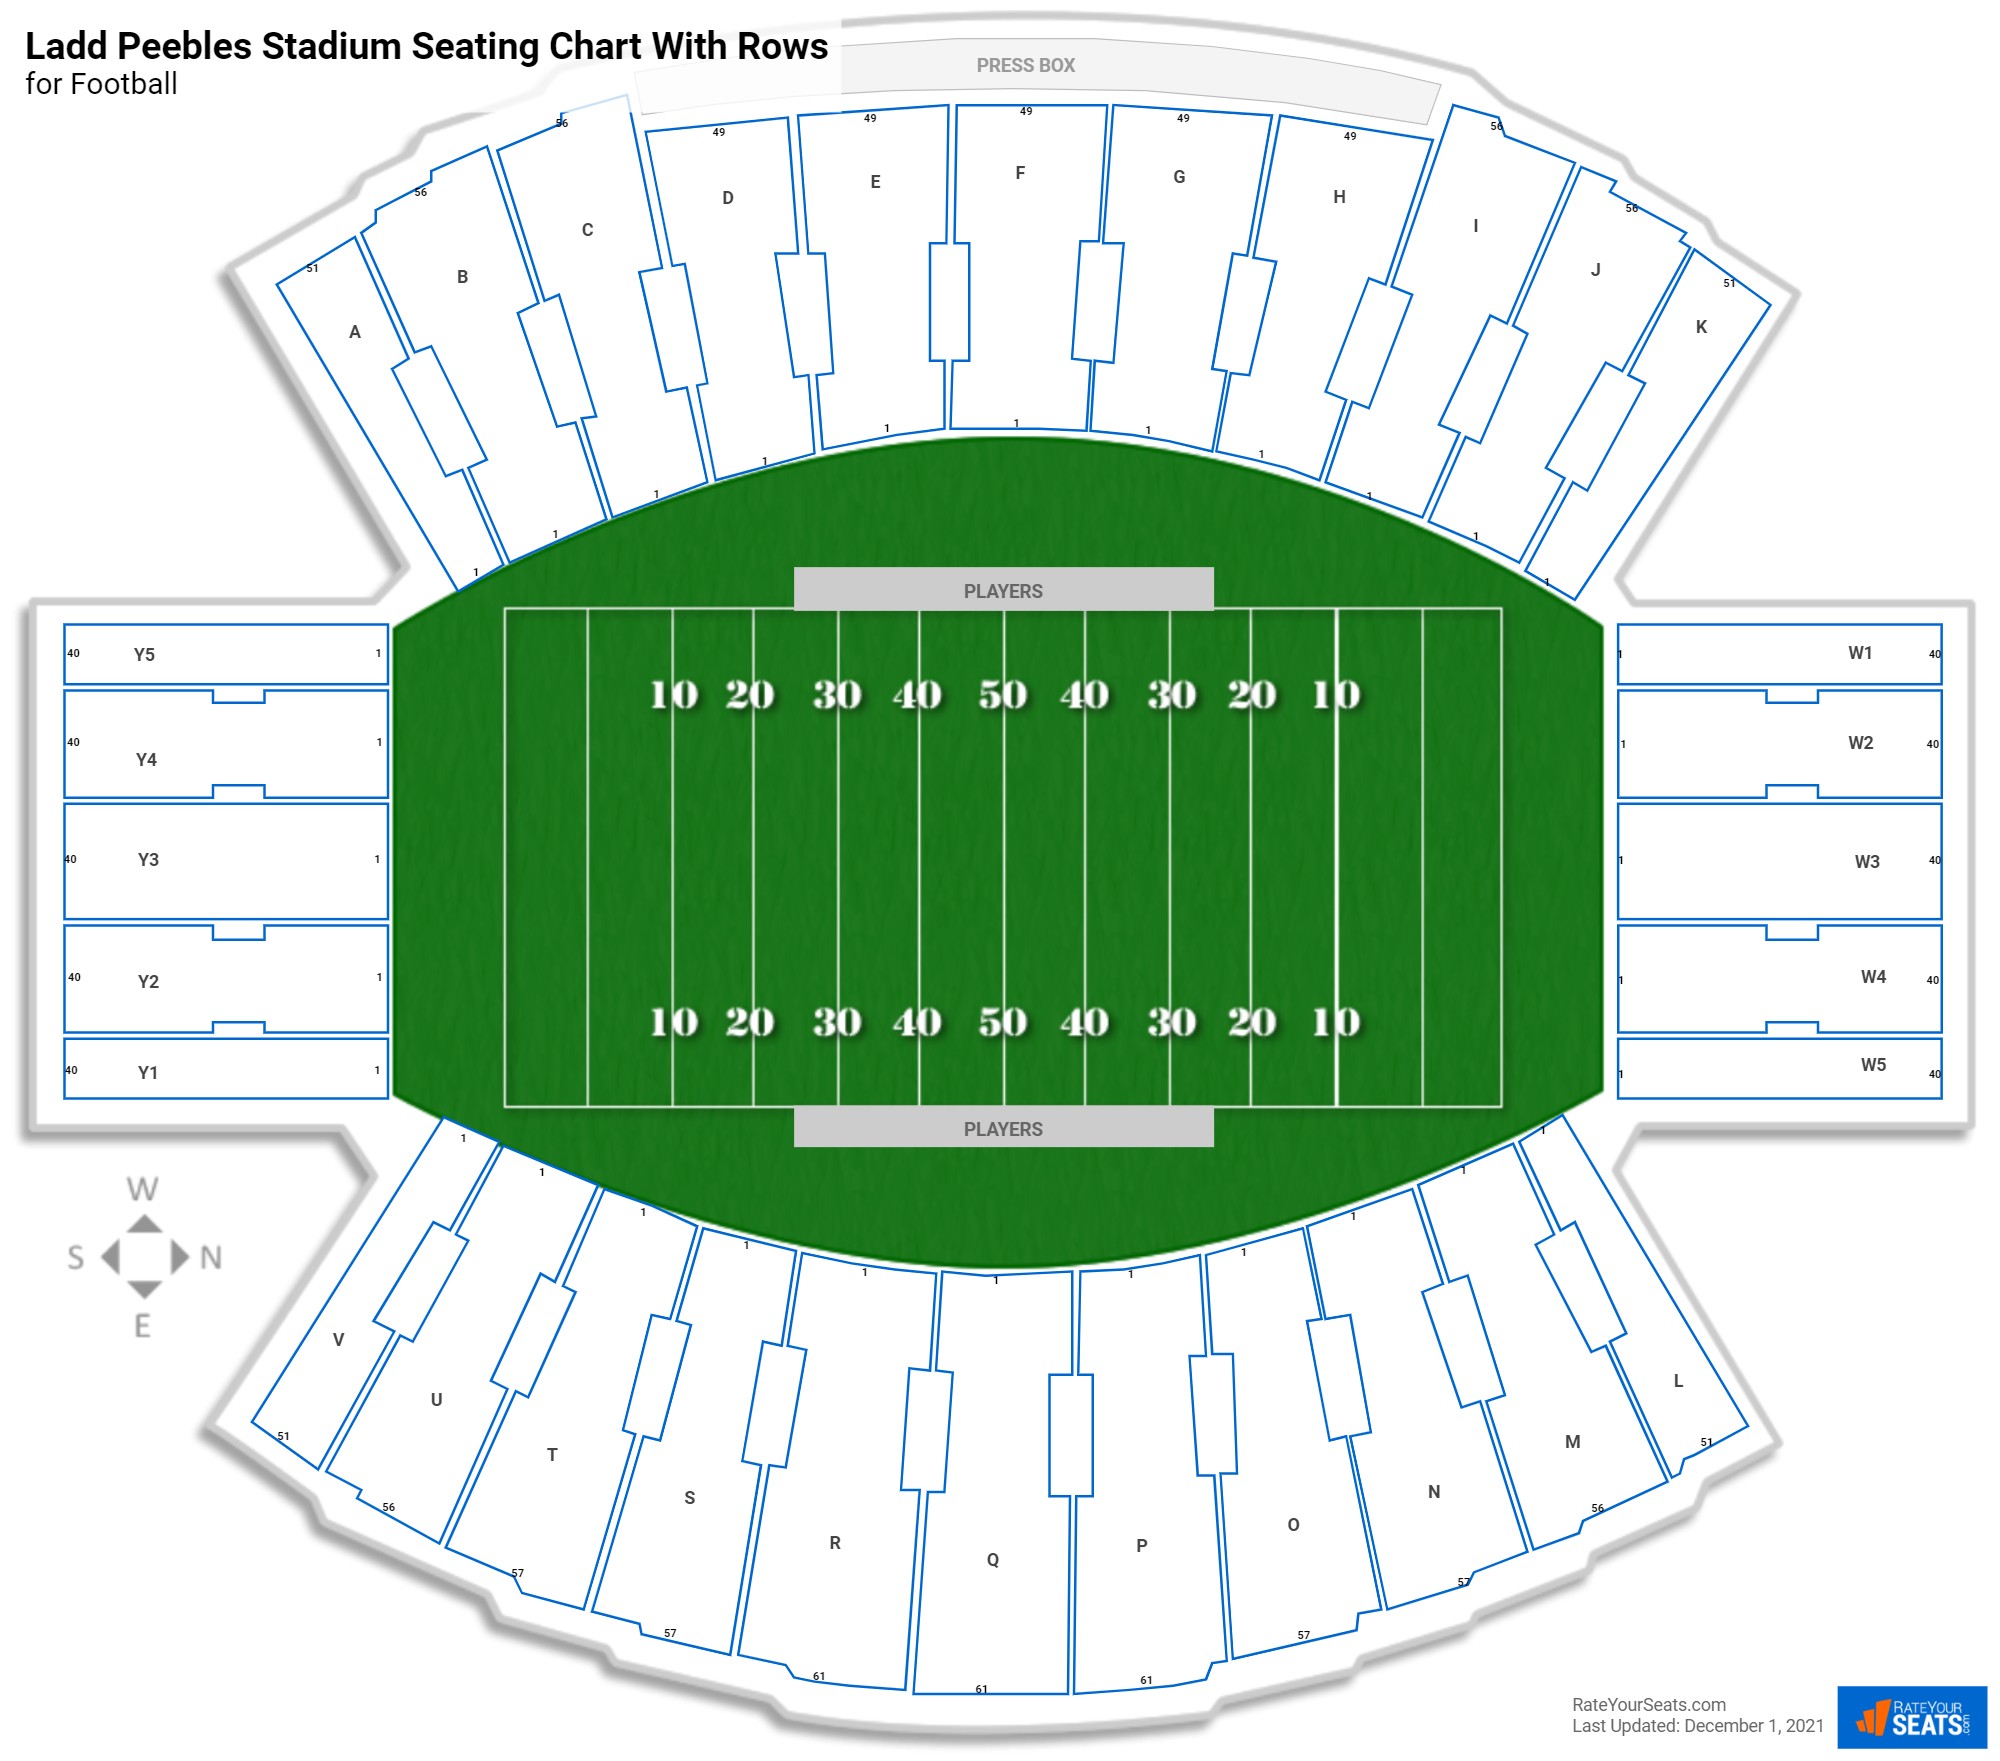 Ladd Peebles Stadium seating chart with row numbers